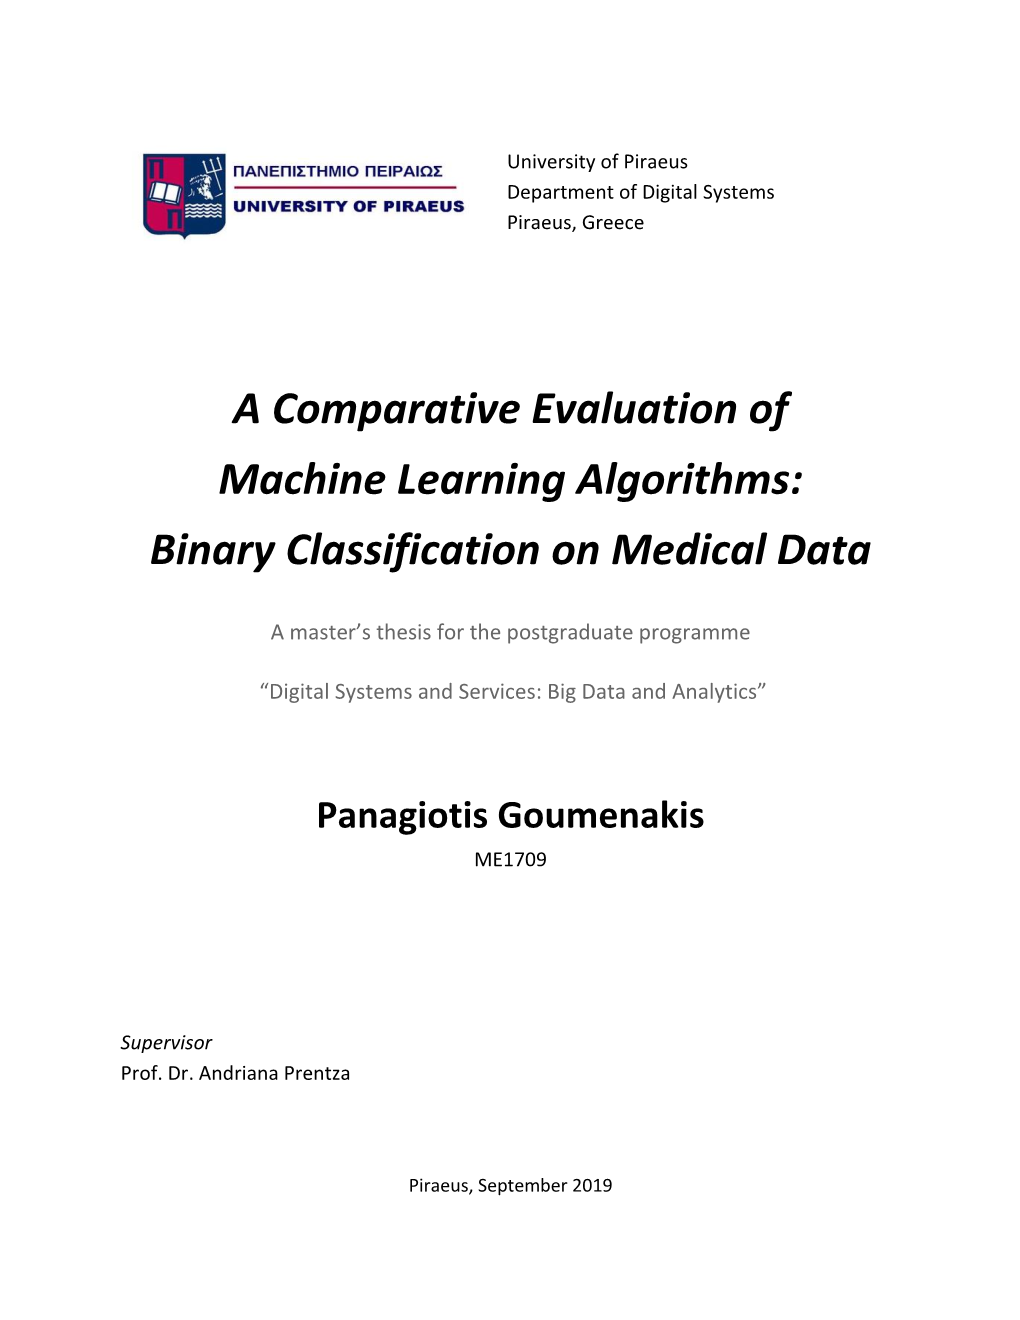 A Comparative Evaluation of Machine Learning Algorithms: Binary Classification on Medical Data